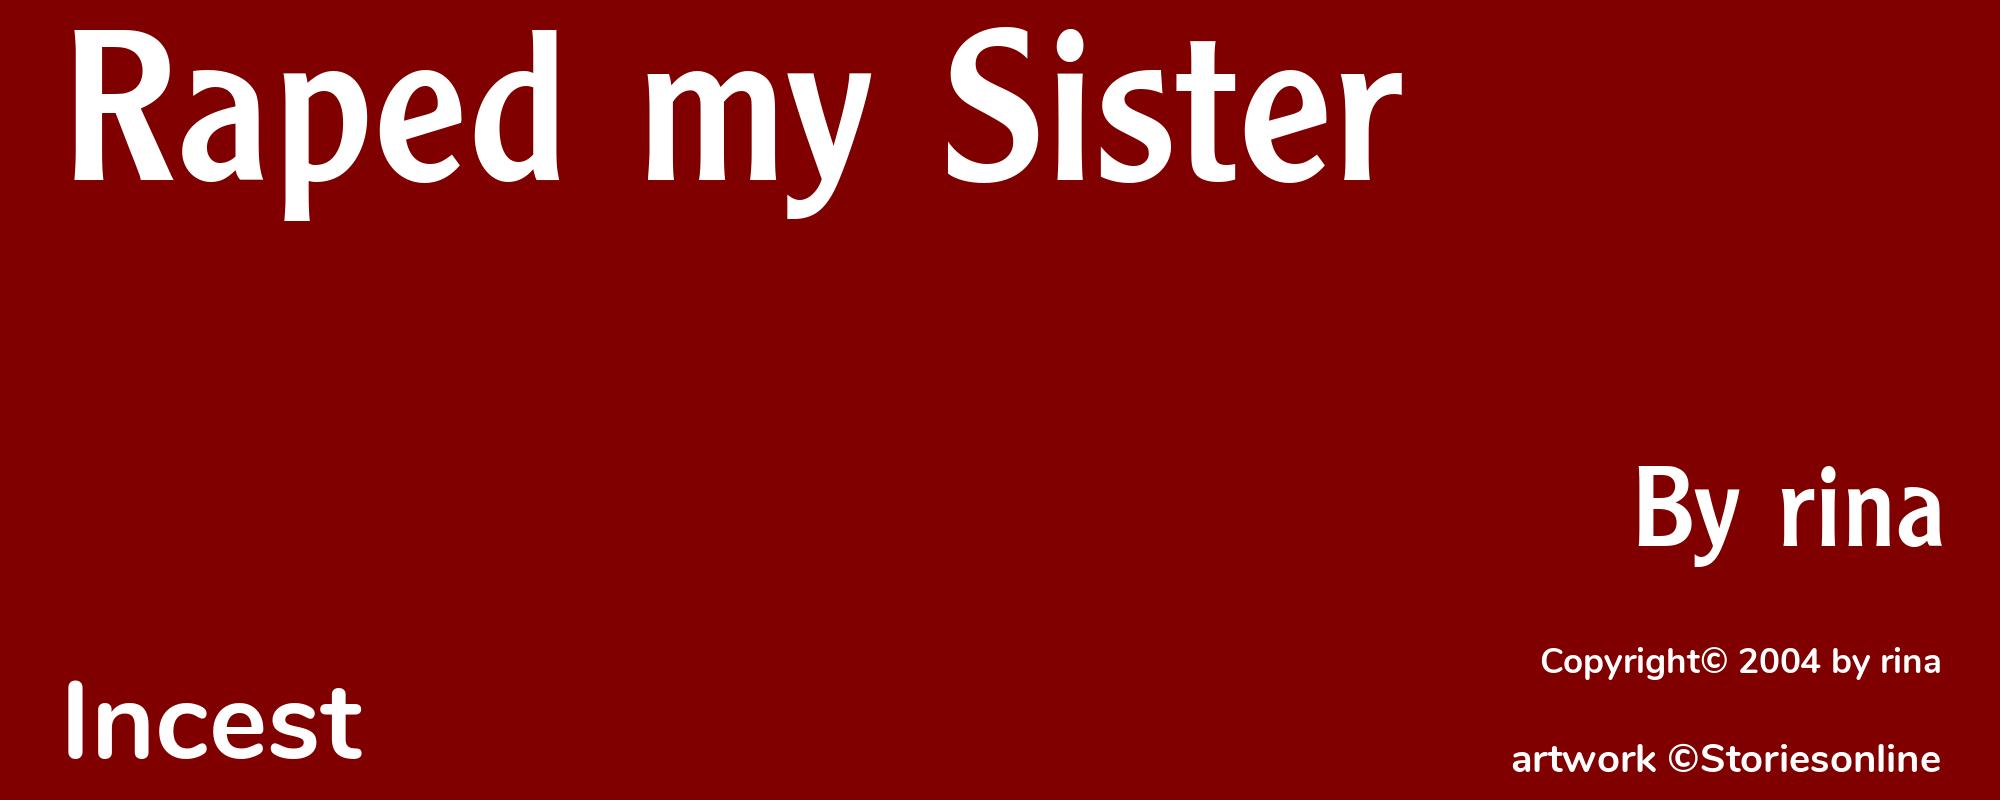 Raped my Sister - Cover